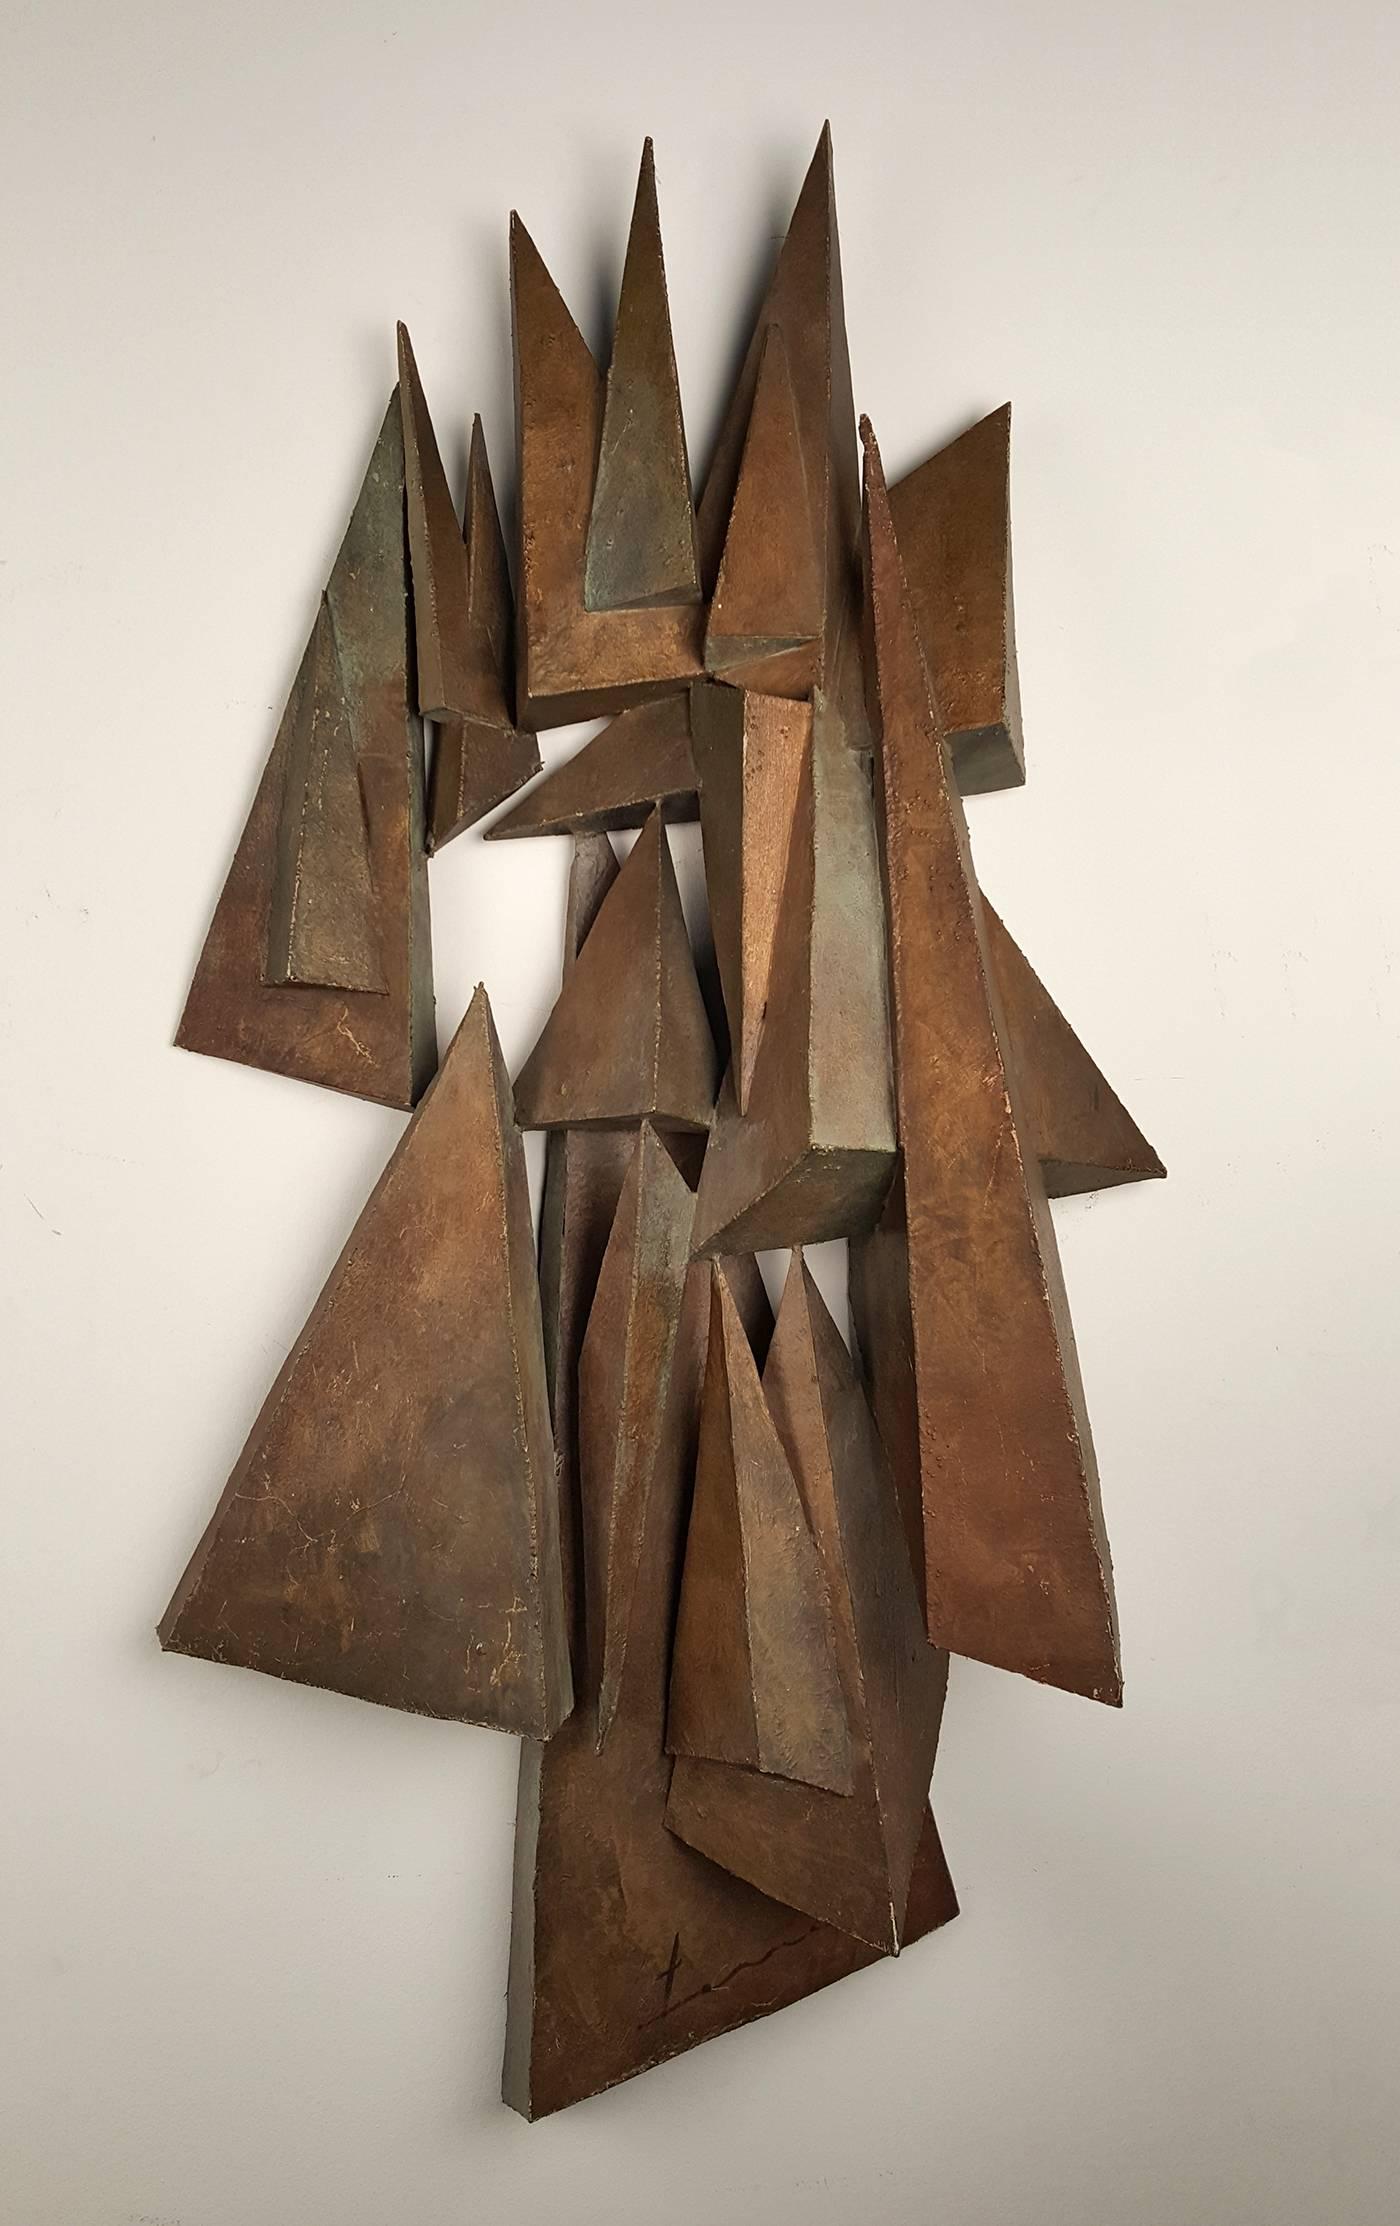 Vintage hand-crafted 1970s Brutalist wall relief sculpture. Welded steel with an applied finish. Signed but illegible. 

